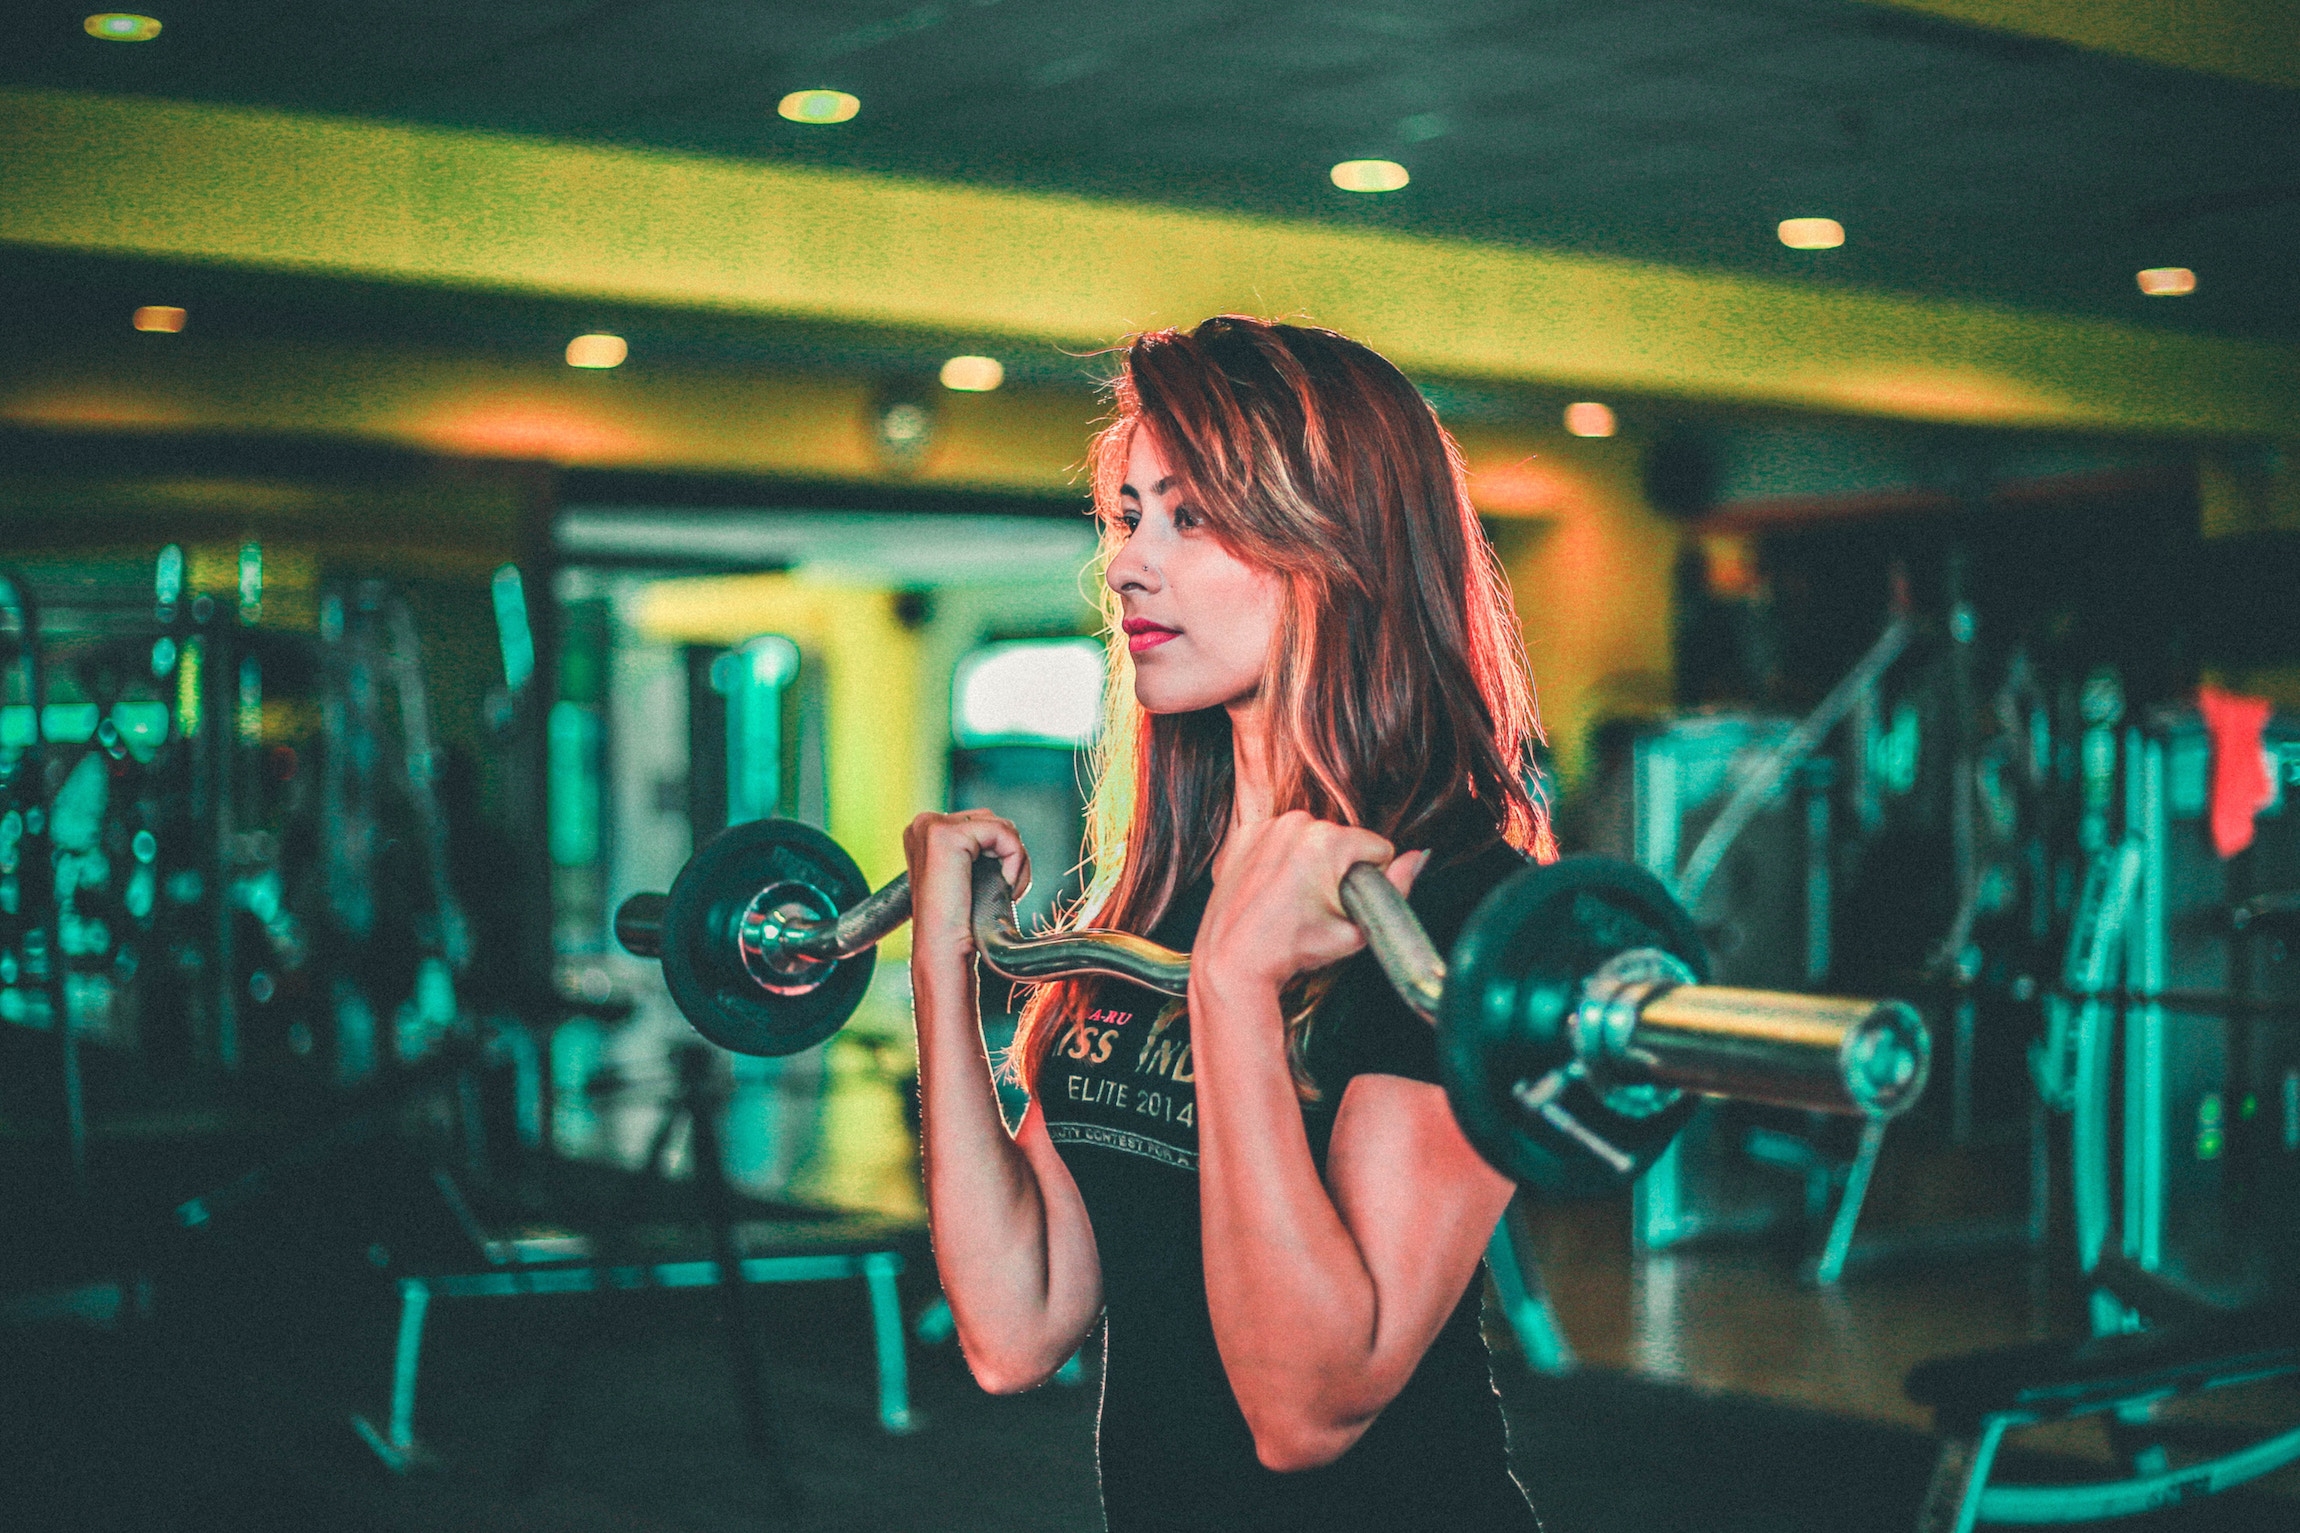 How music can benefit your gym experience